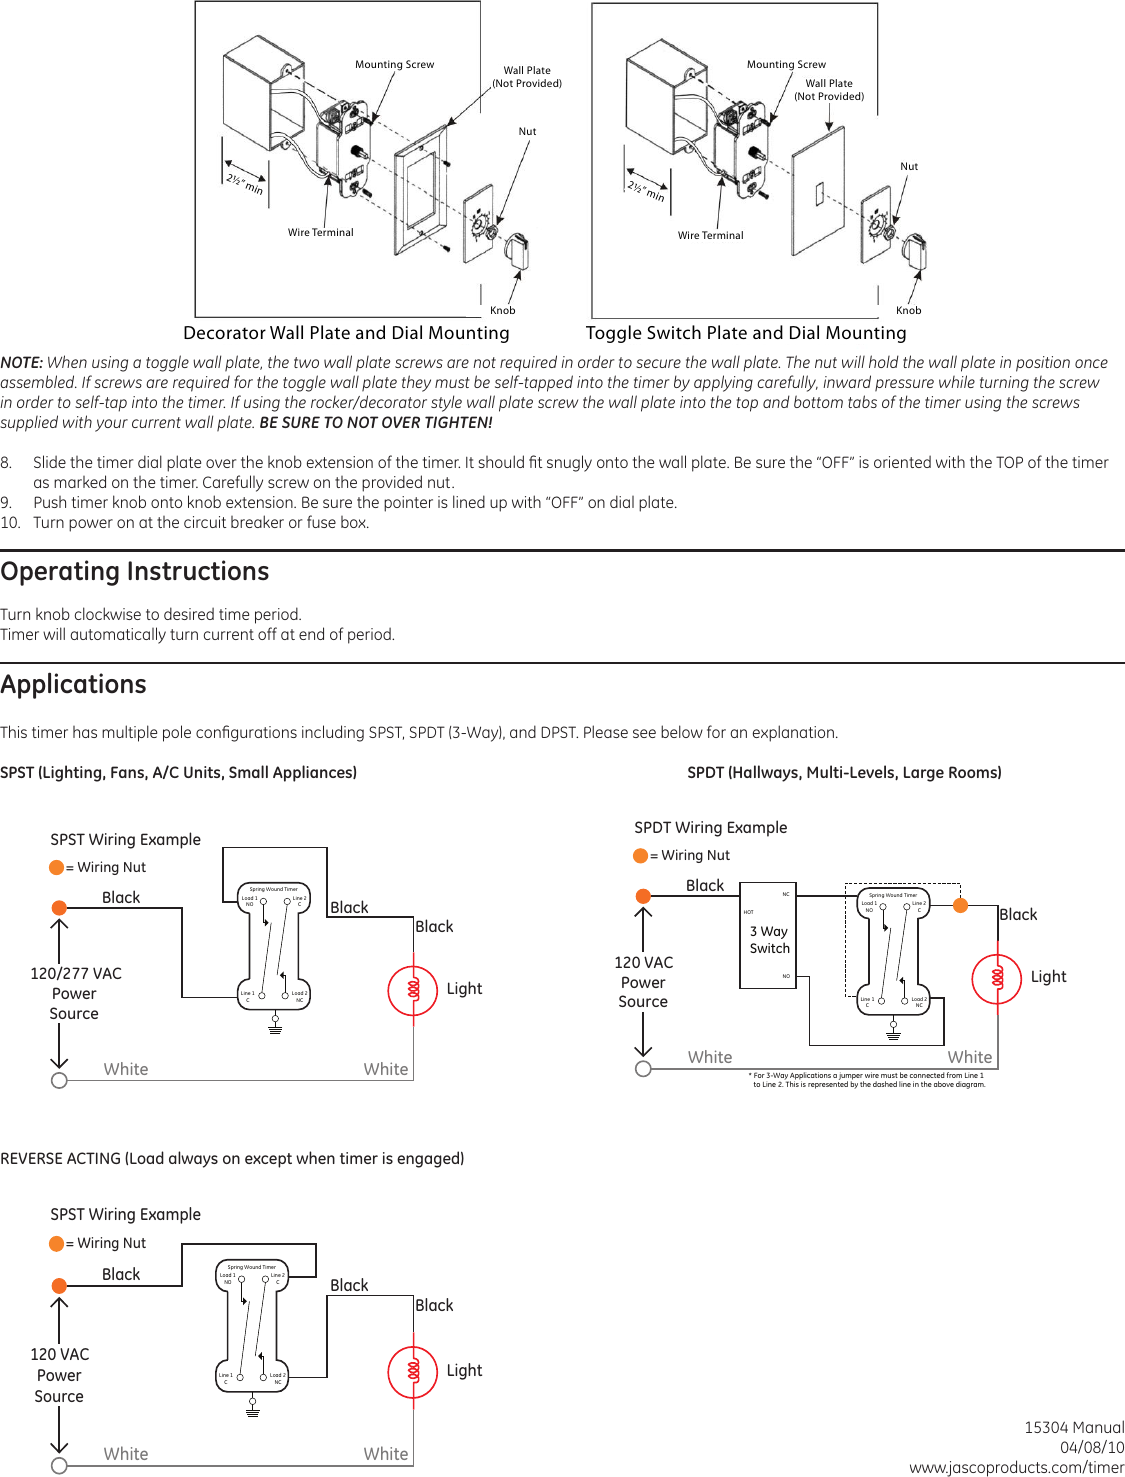 Page 2 of 2 - Ge-Appliances Ge-Spring-Wound-Timer-15304-Owners-Manual